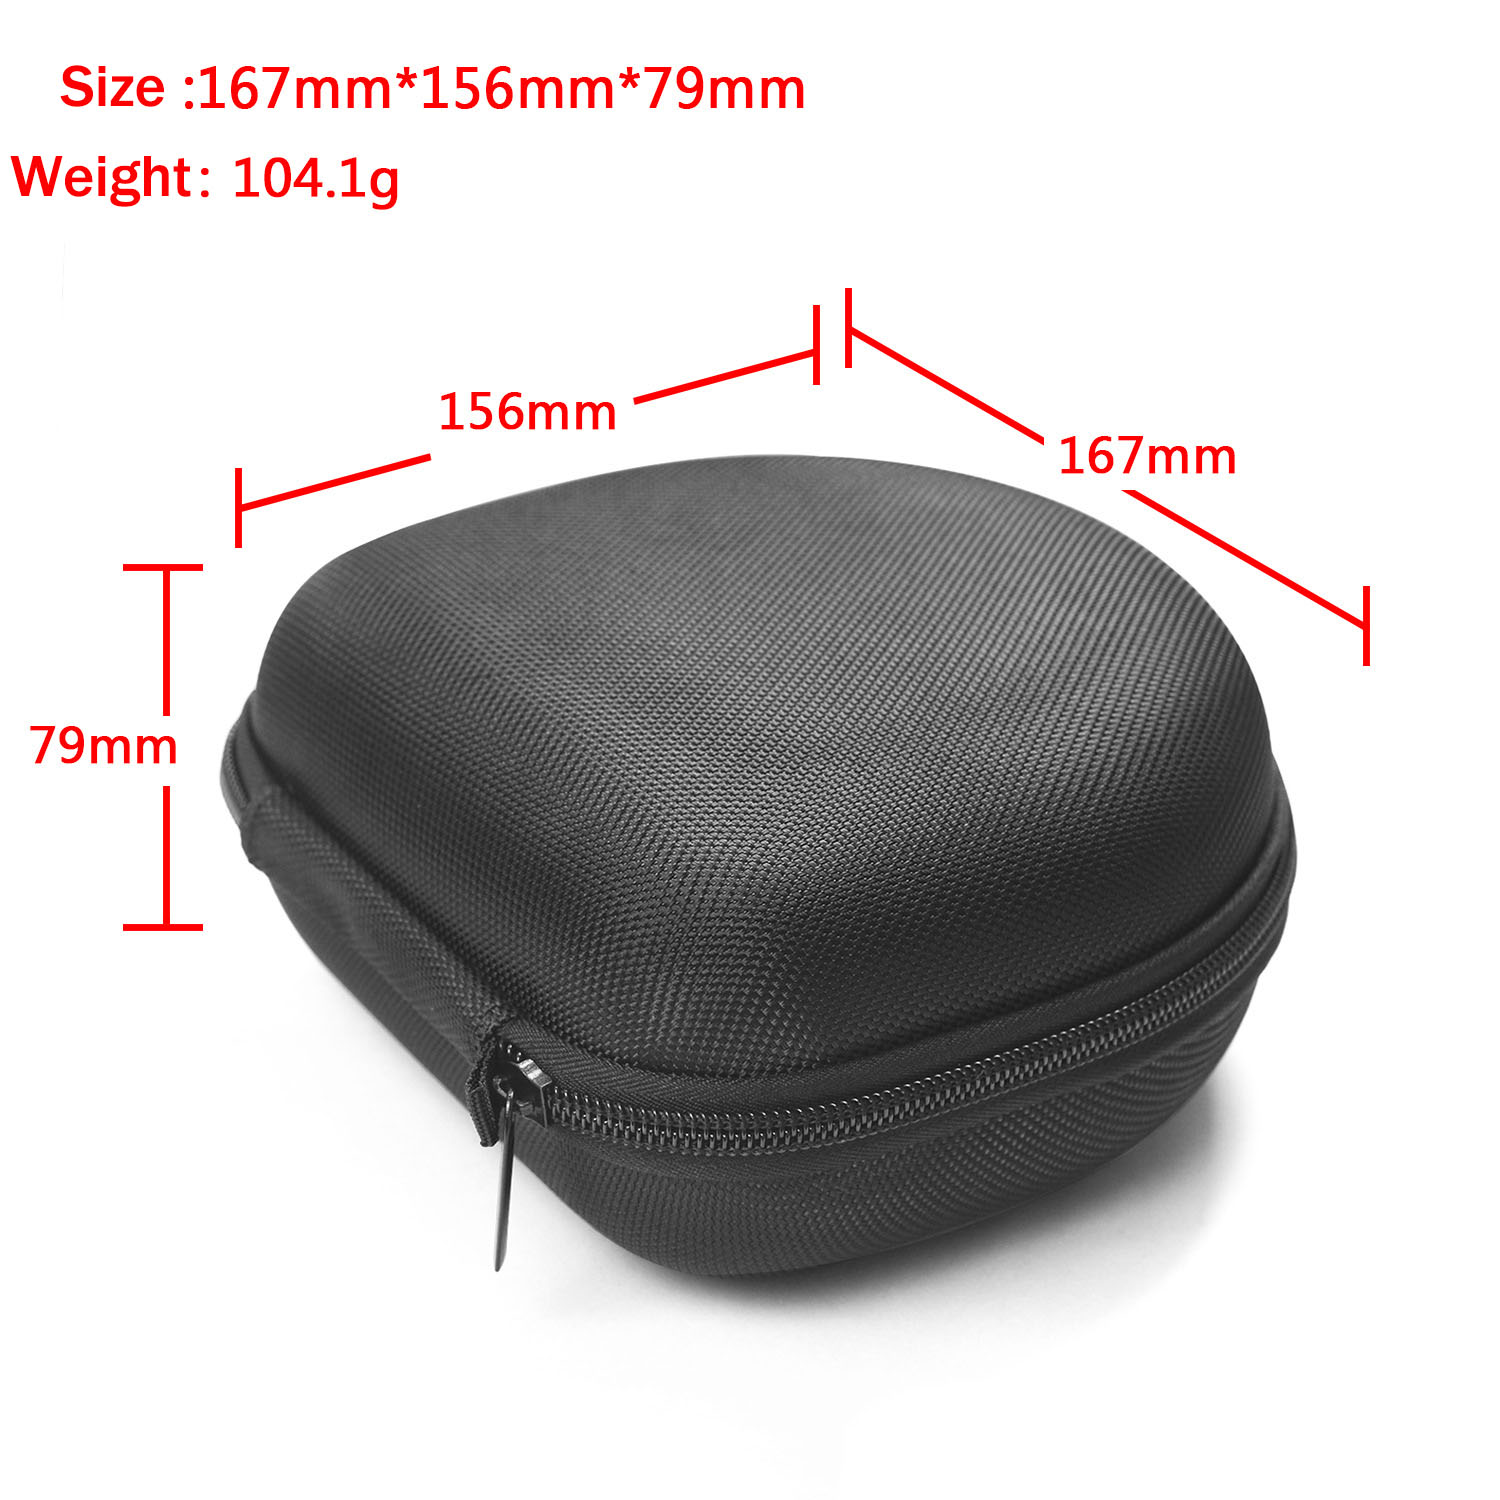 Bakeey Headphone Storage Bag Dustproof Portable Hard Carrying Case Wireless Head-Mounted Headset Protection Package Box for Studio3